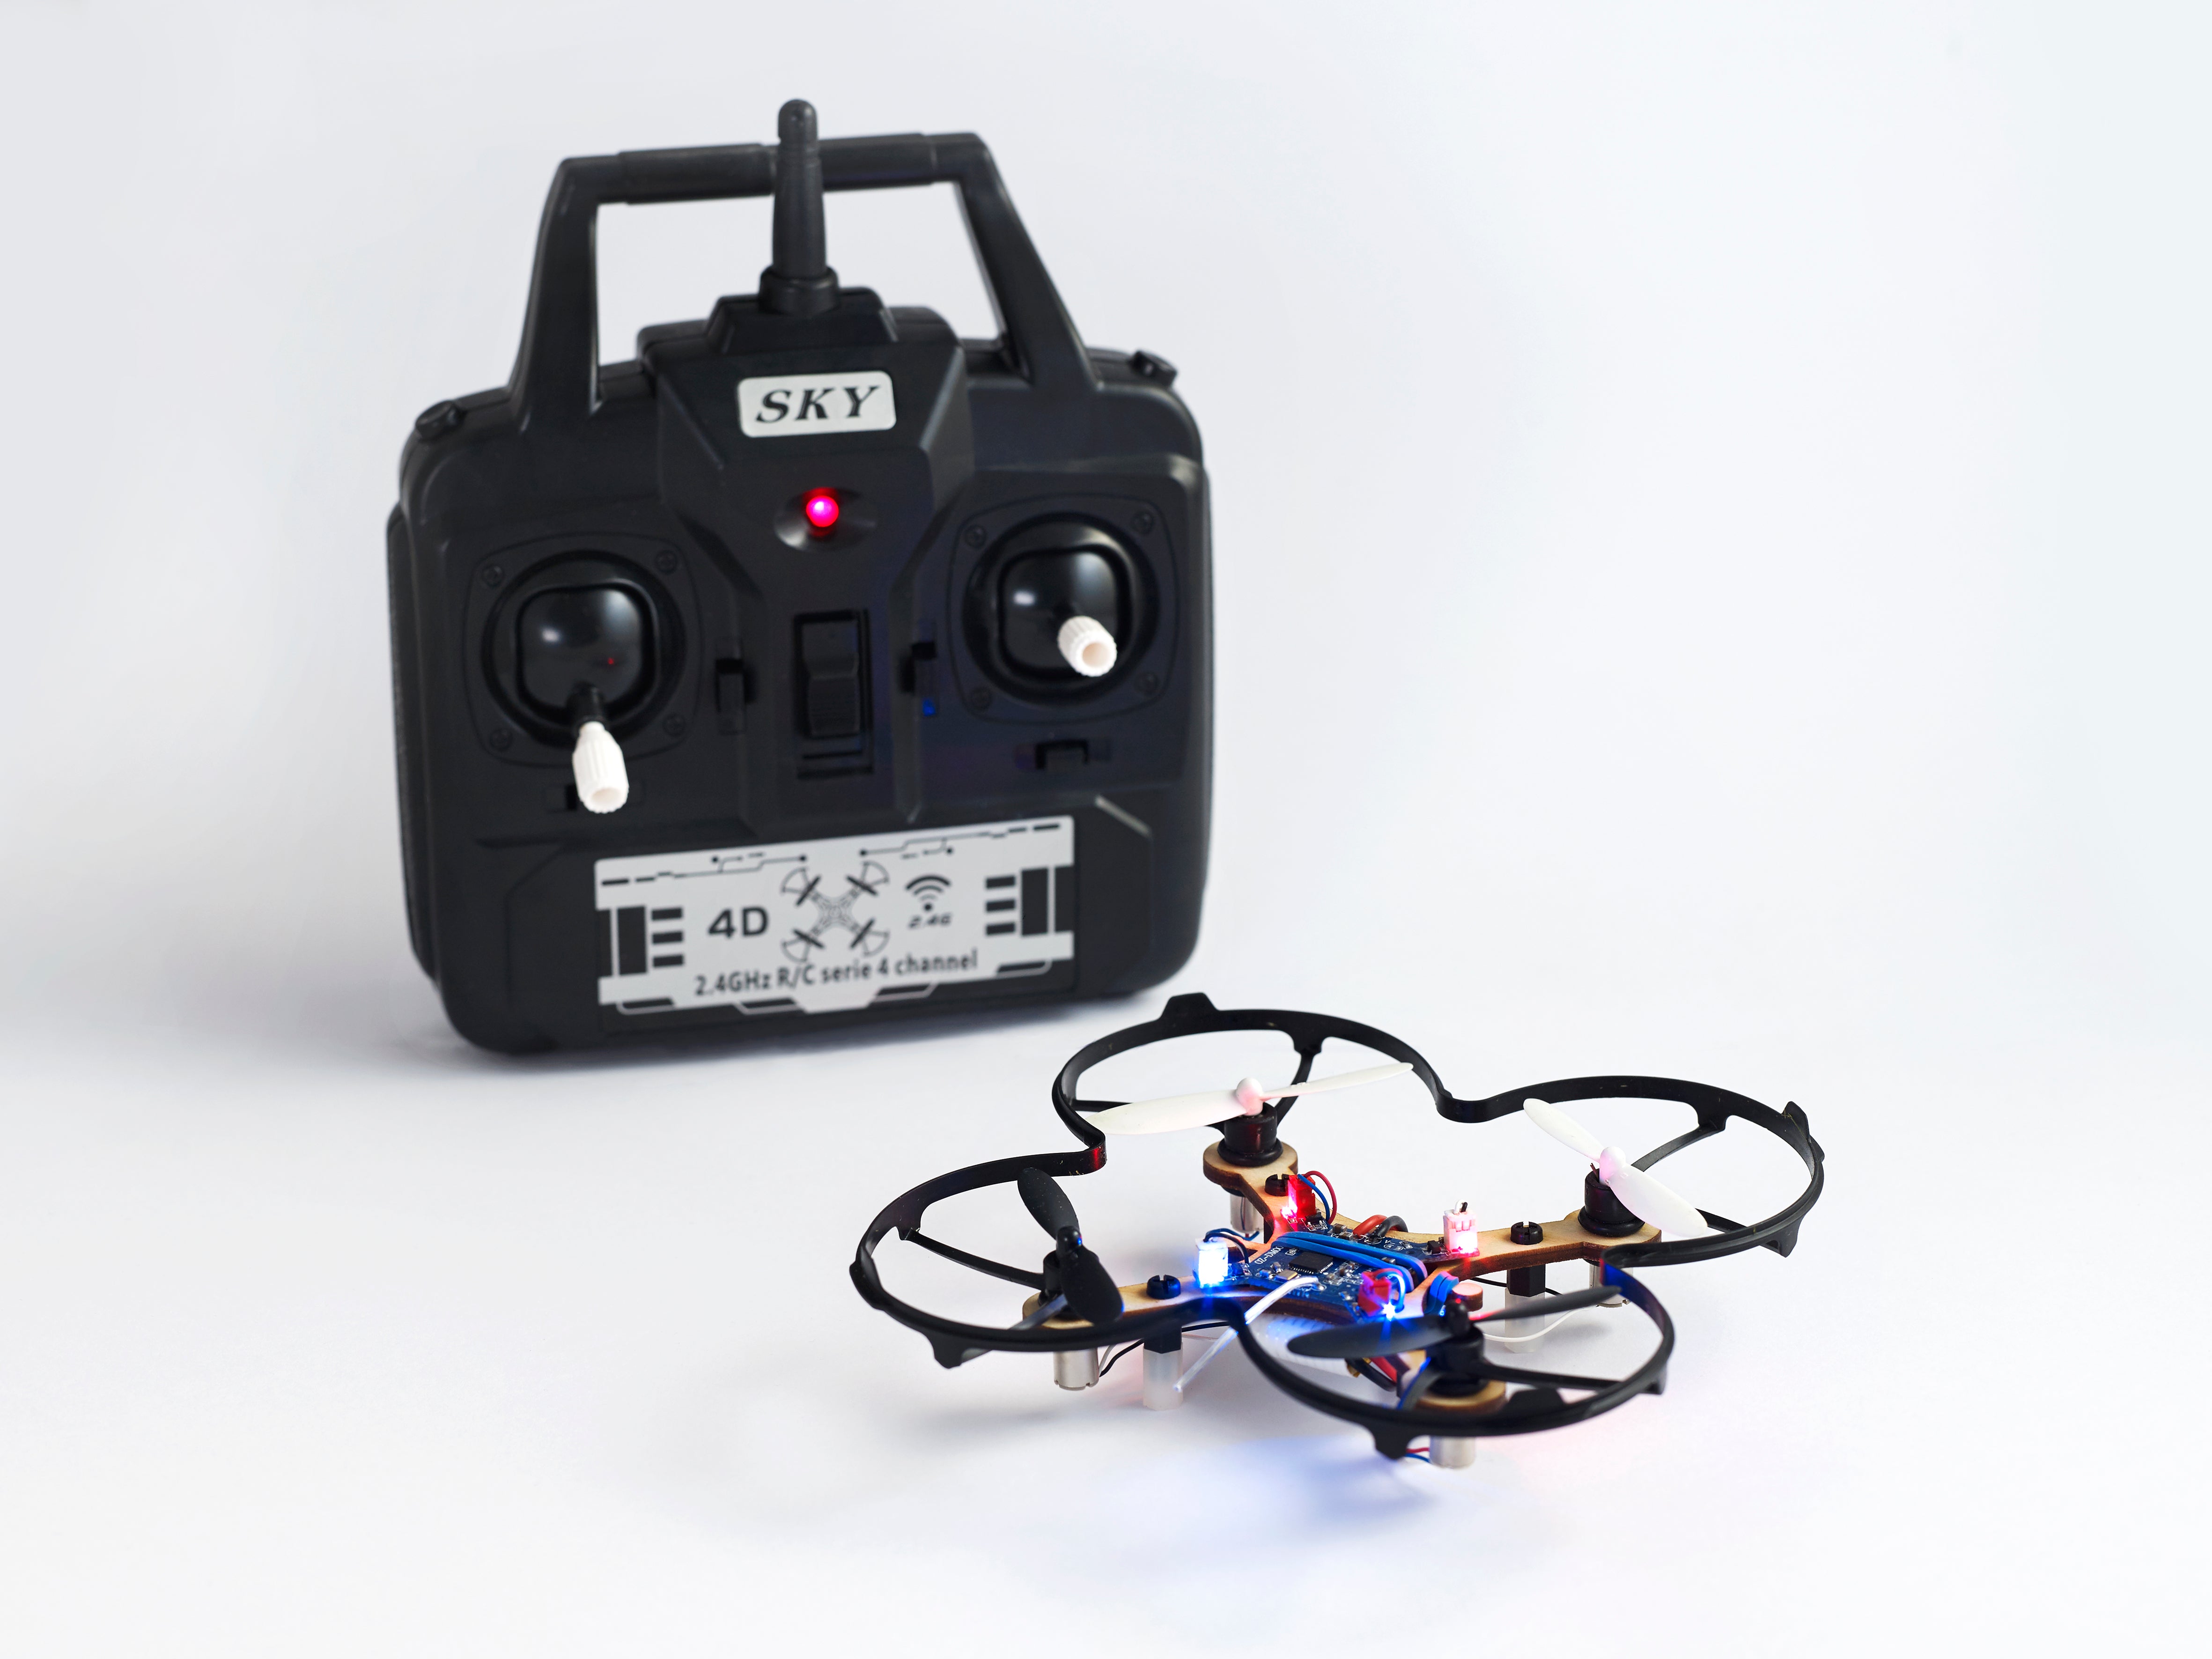 Hummingbird / Makerspace Package: 12 Drone building kit with camera extra batteries, for laser cutter / 3D printer